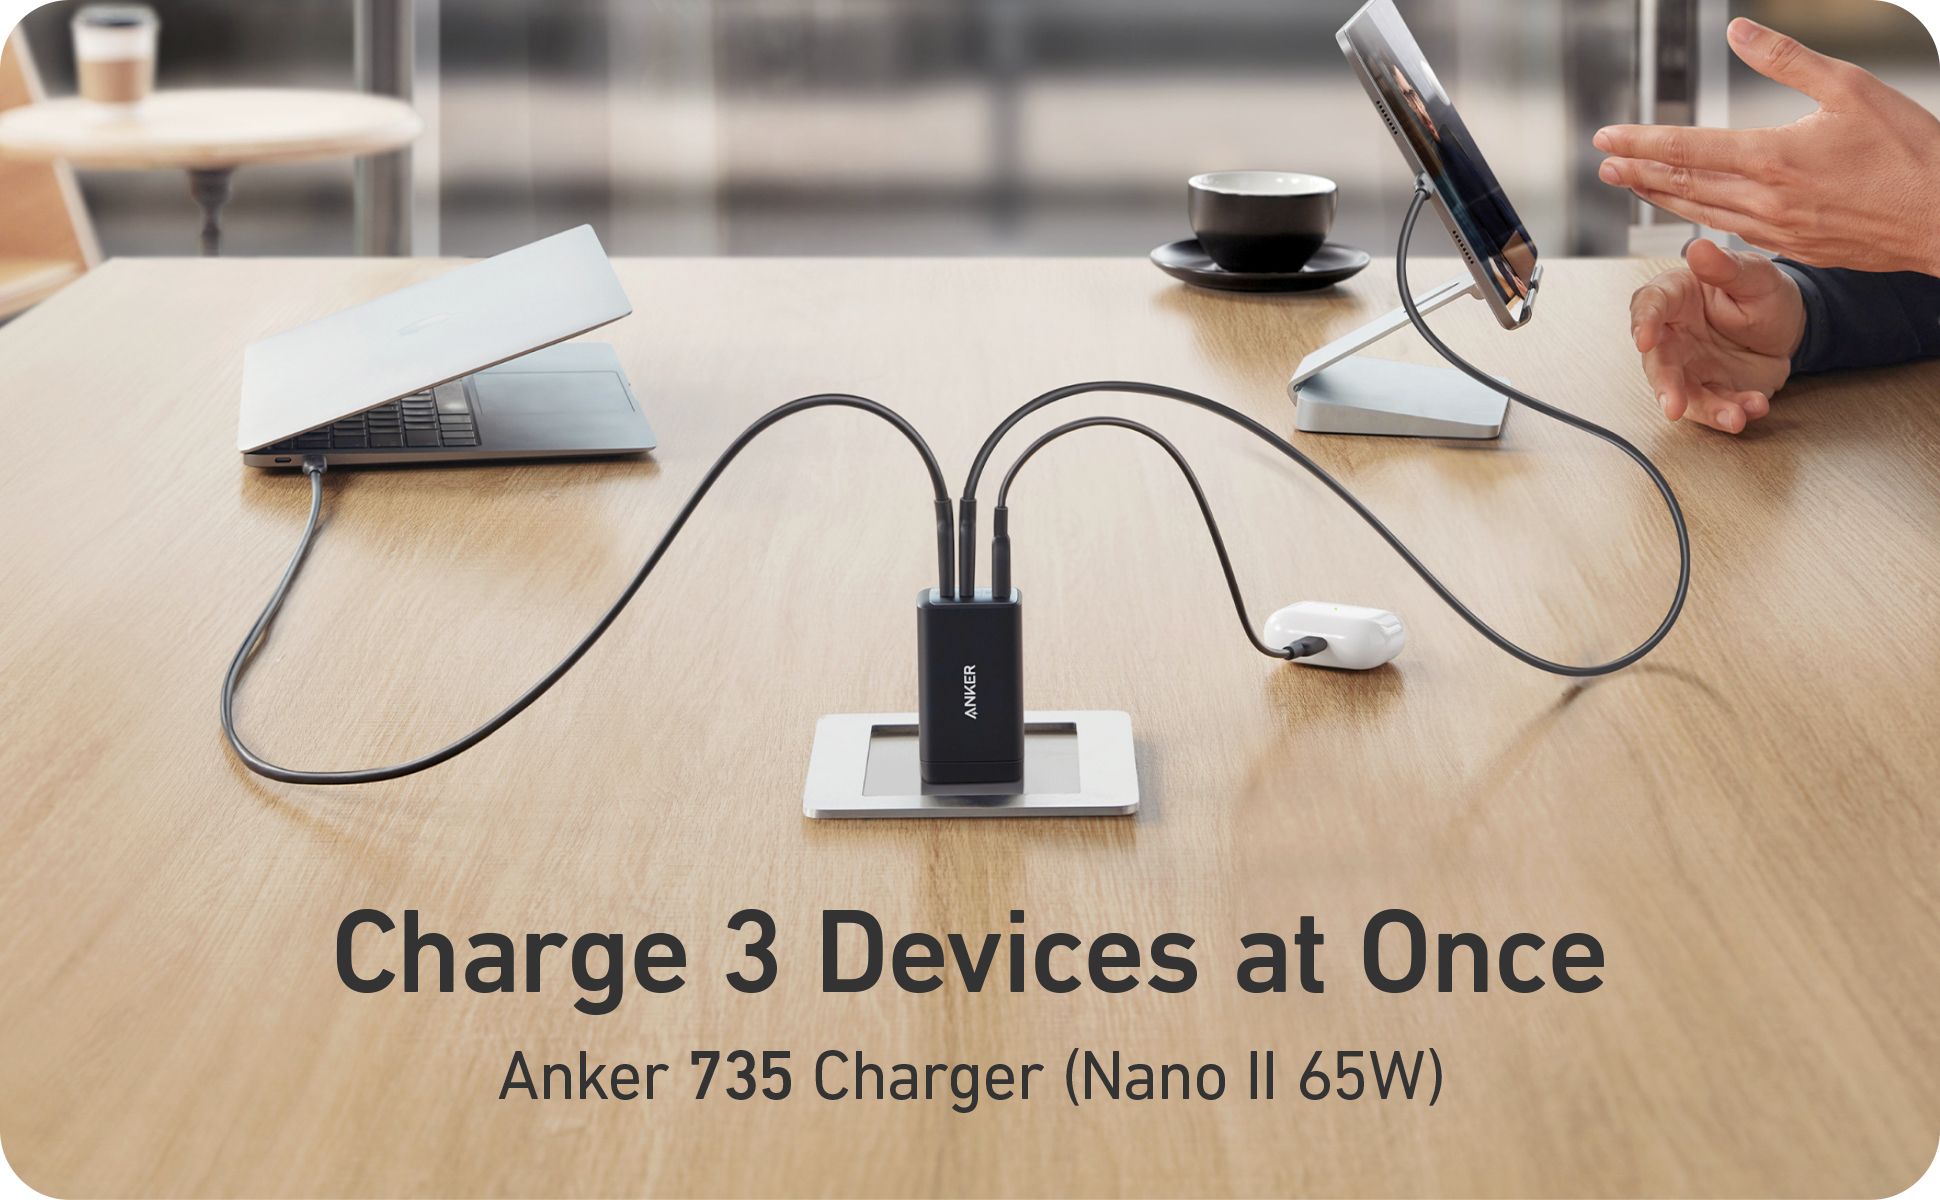 Anker 735 Charger plugged into MacBook, AirPods, and an iPad